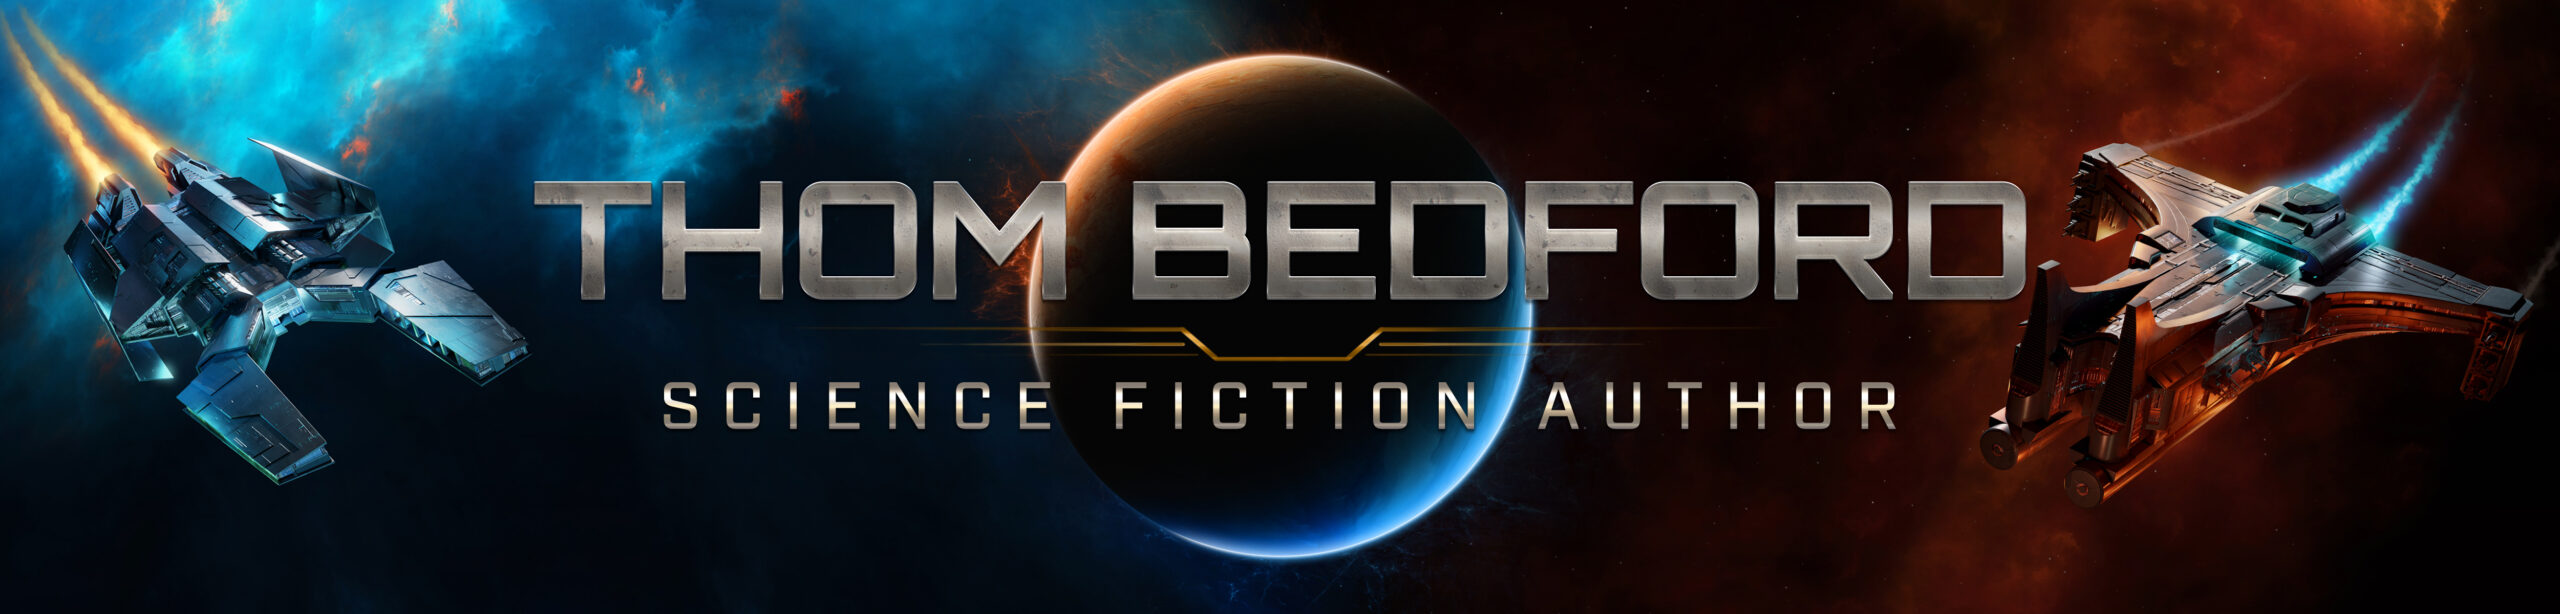 Thom Bedford - Science Fiction Author